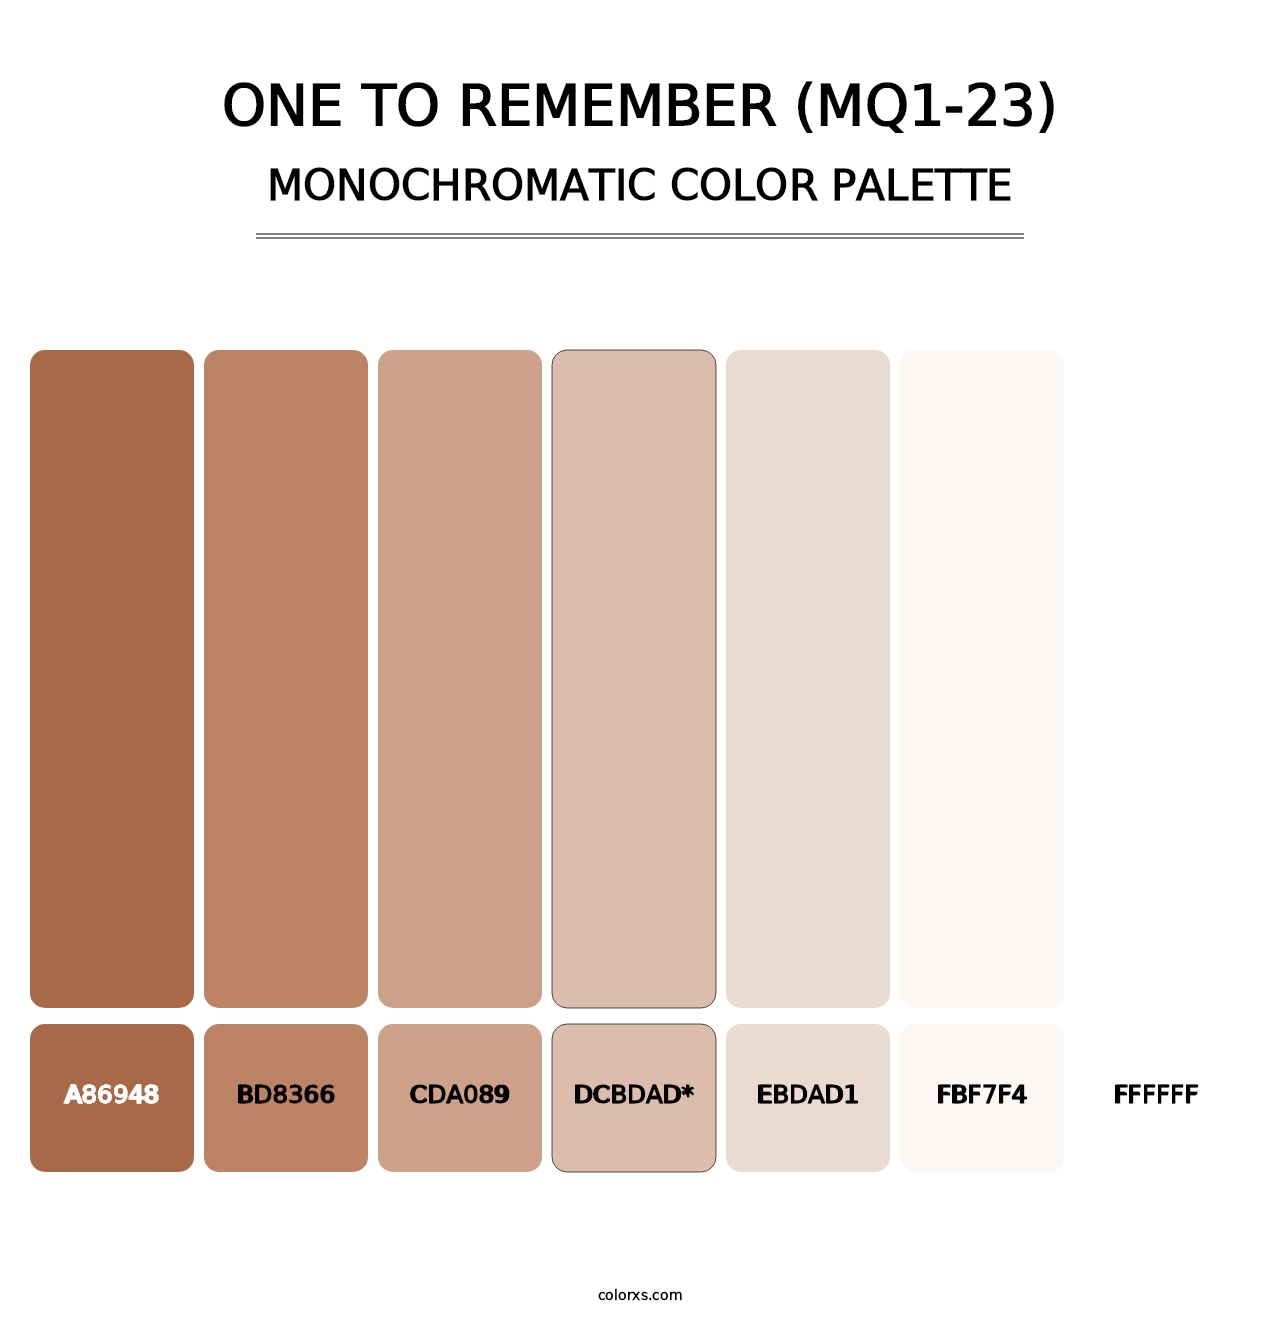 One To Remember (MQ1-23) - Monochromatic Color Palette